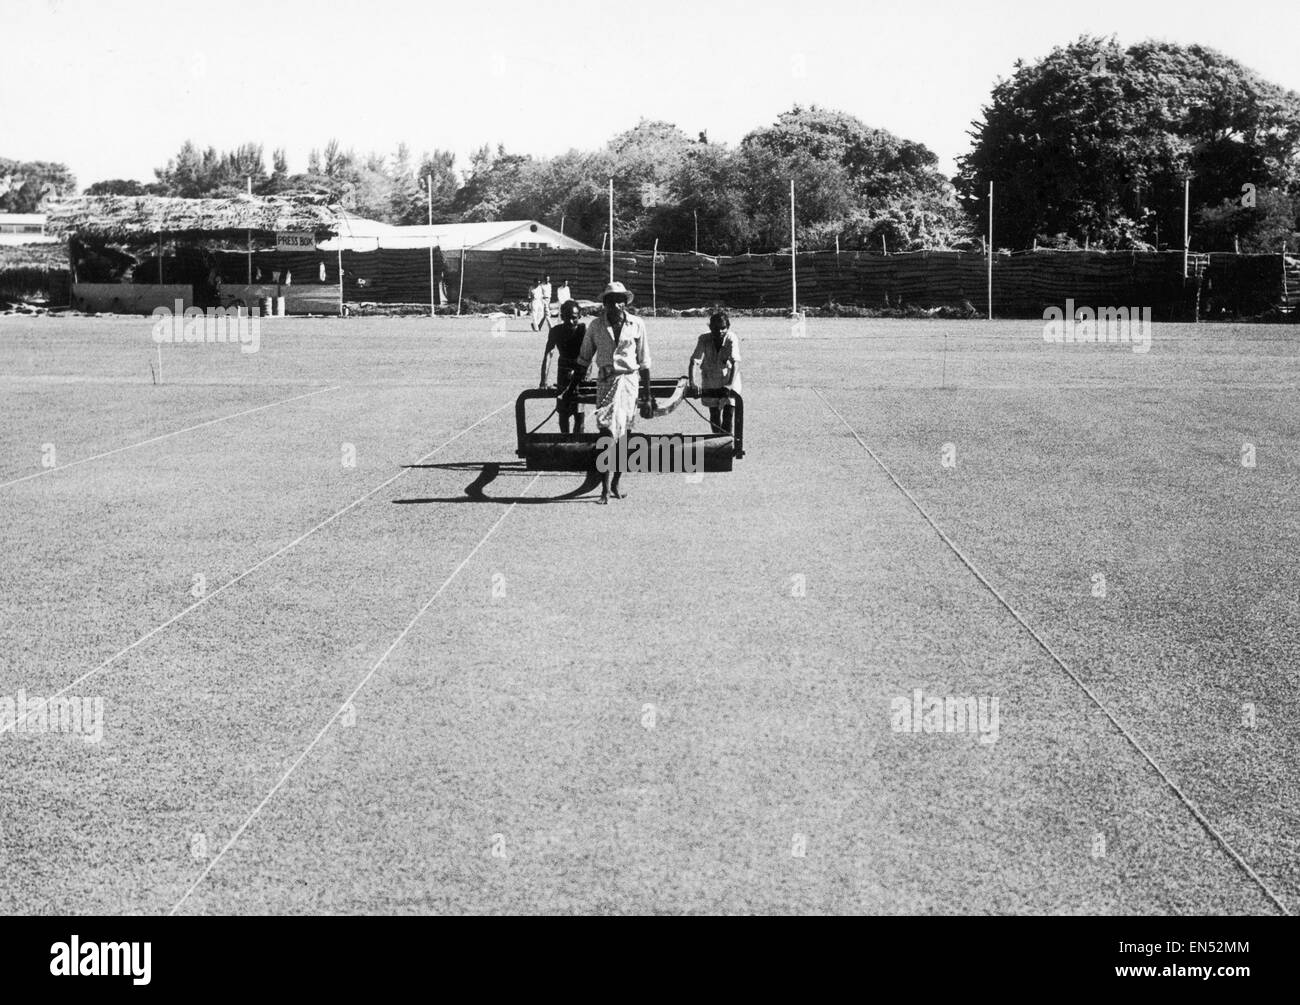 Groundsmen prepare the field at Sinhalese Sports Club grounds in Colombo, Sri Lanka where the MCC team will play 2 matches against Ceylon teams. Temporary sheds have been erected to accomodate spectators. October 1958. Stock Photo